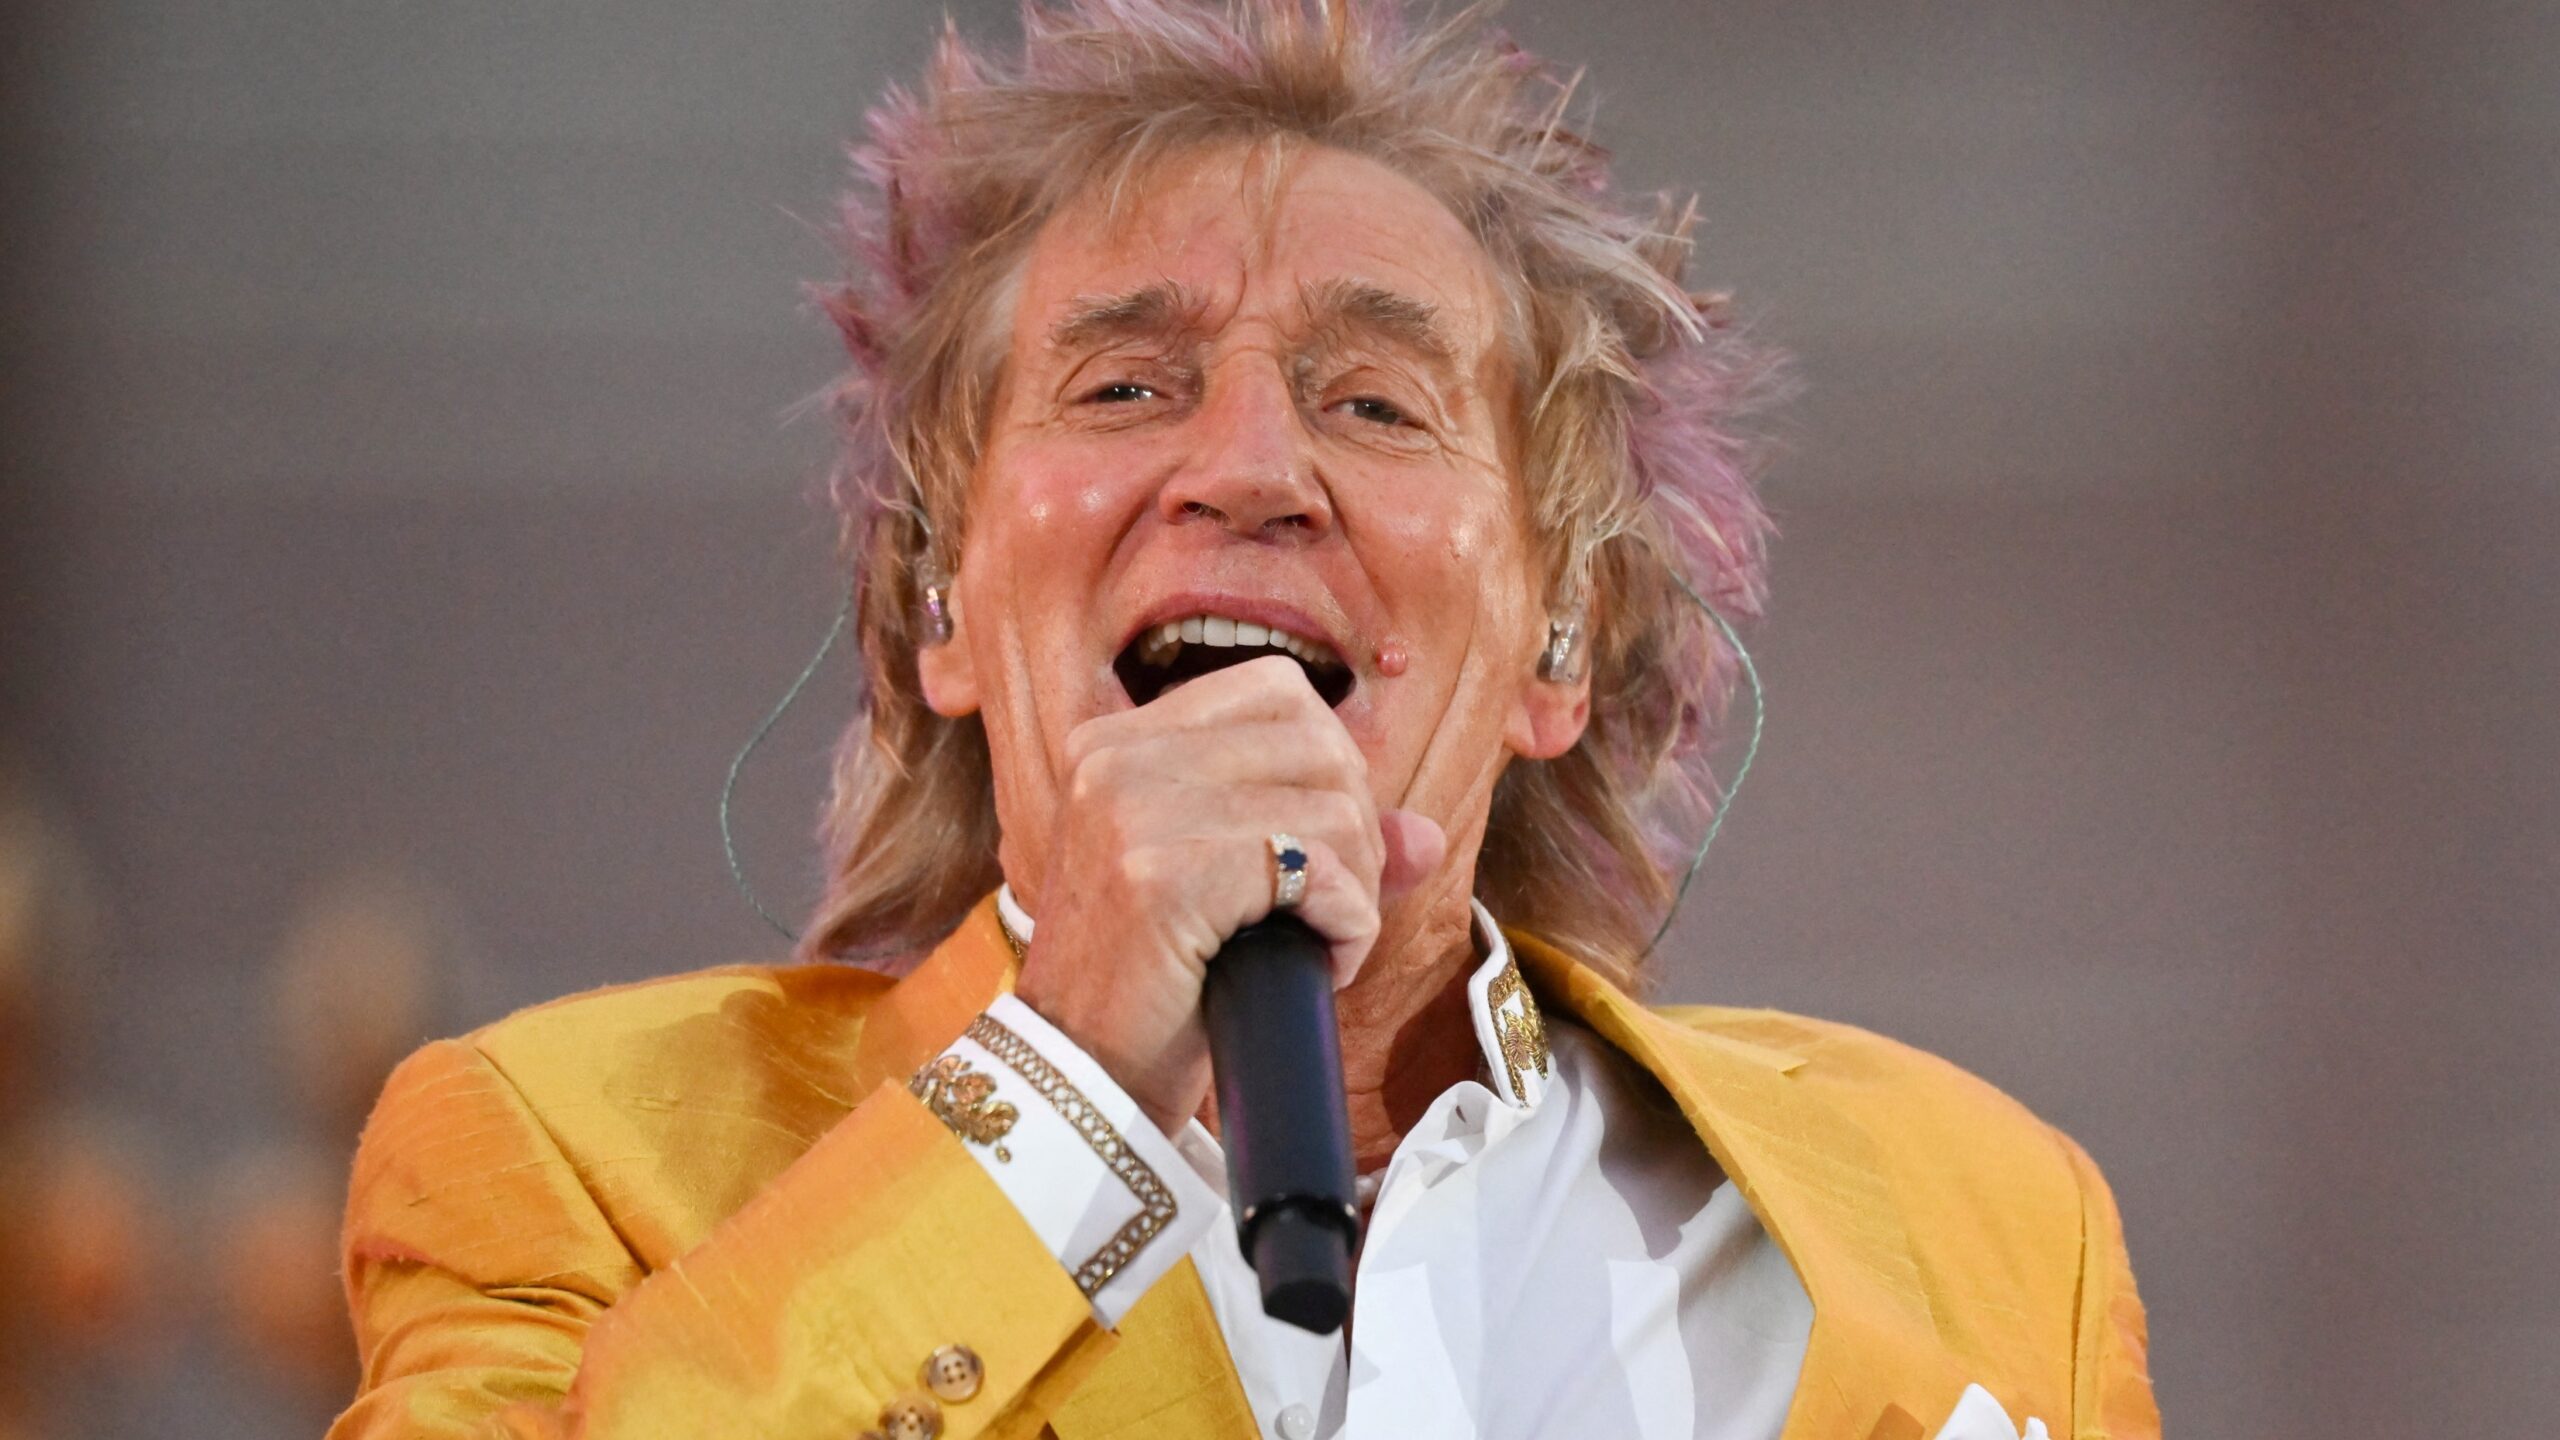 Rod Stewart slams ‘ridiculous’ state of health system in surprise call to news program